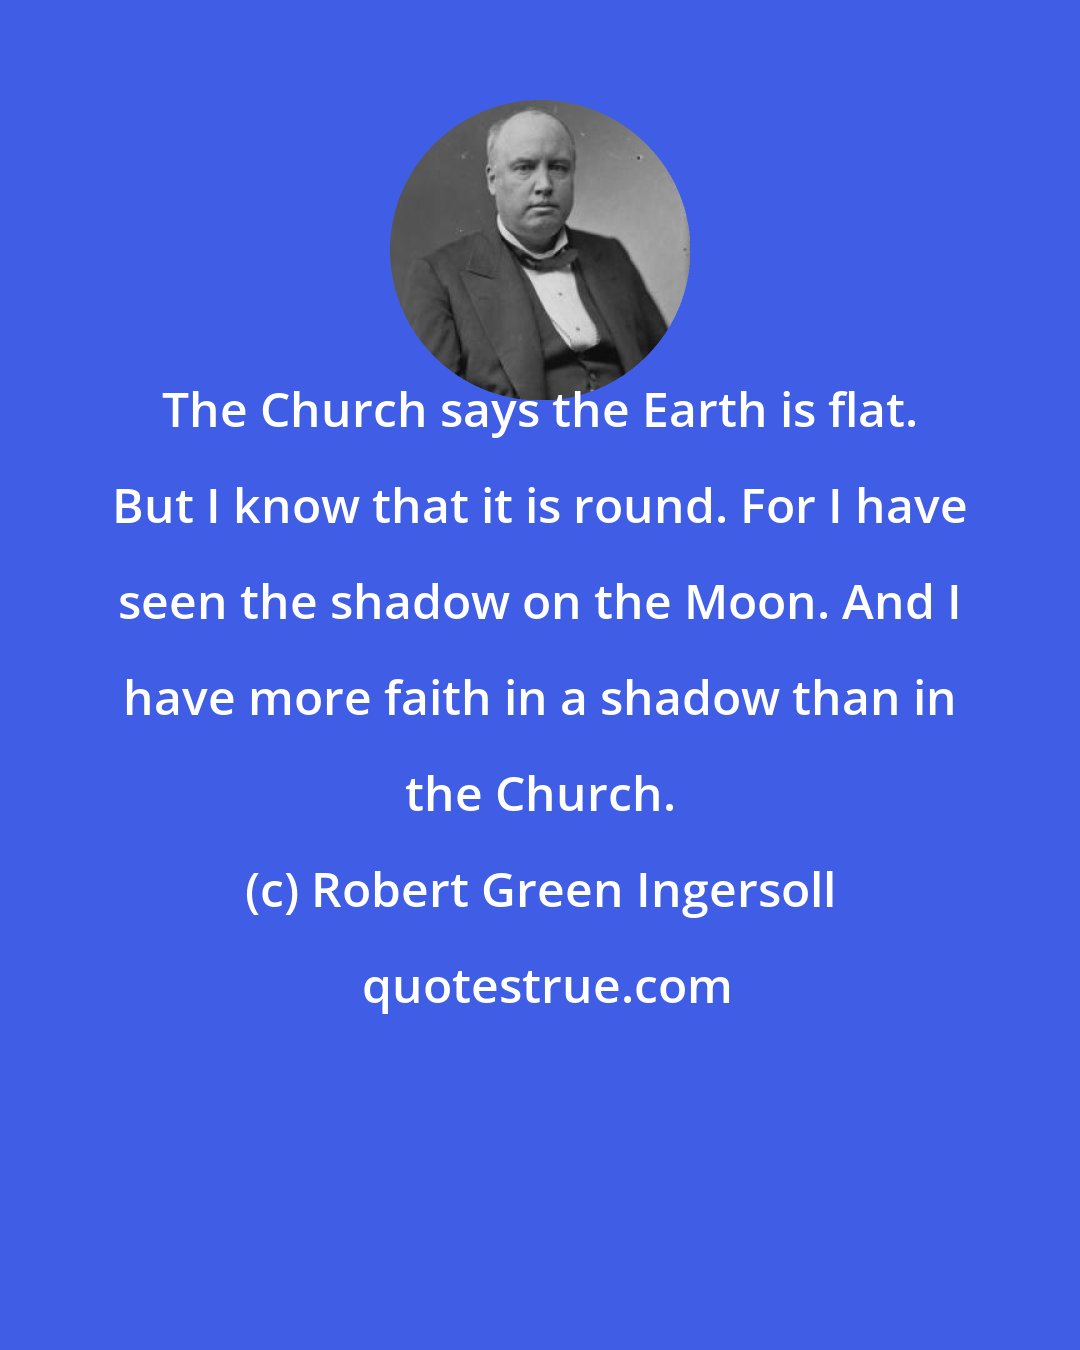 Robert Green Ingersoll: The Church says the Earth is flat. But I know that it is round. For I have seen the shadow on the Moon. And I have more faith in a shadow than in the Church.